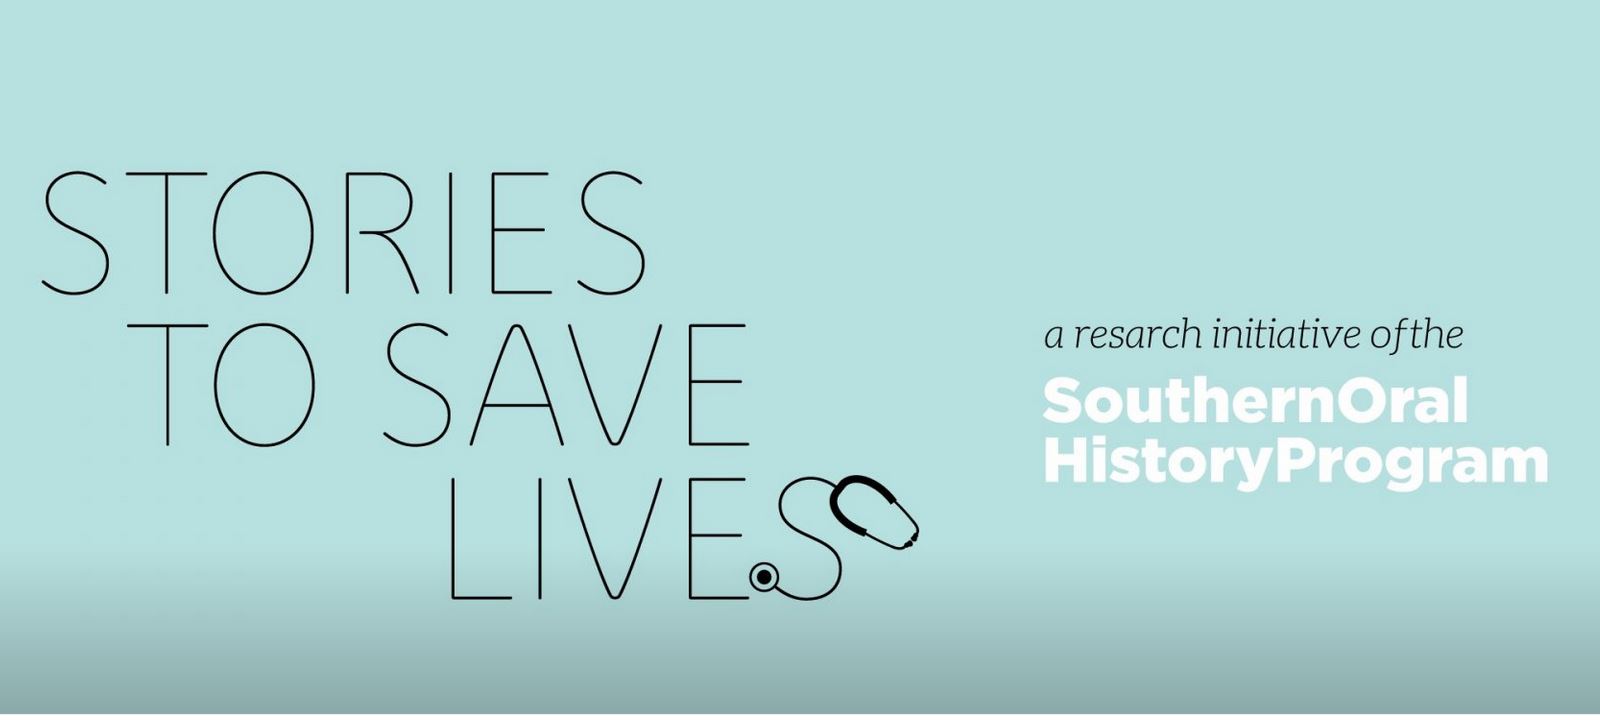 Screen shot of Stories to Save Lives website banner